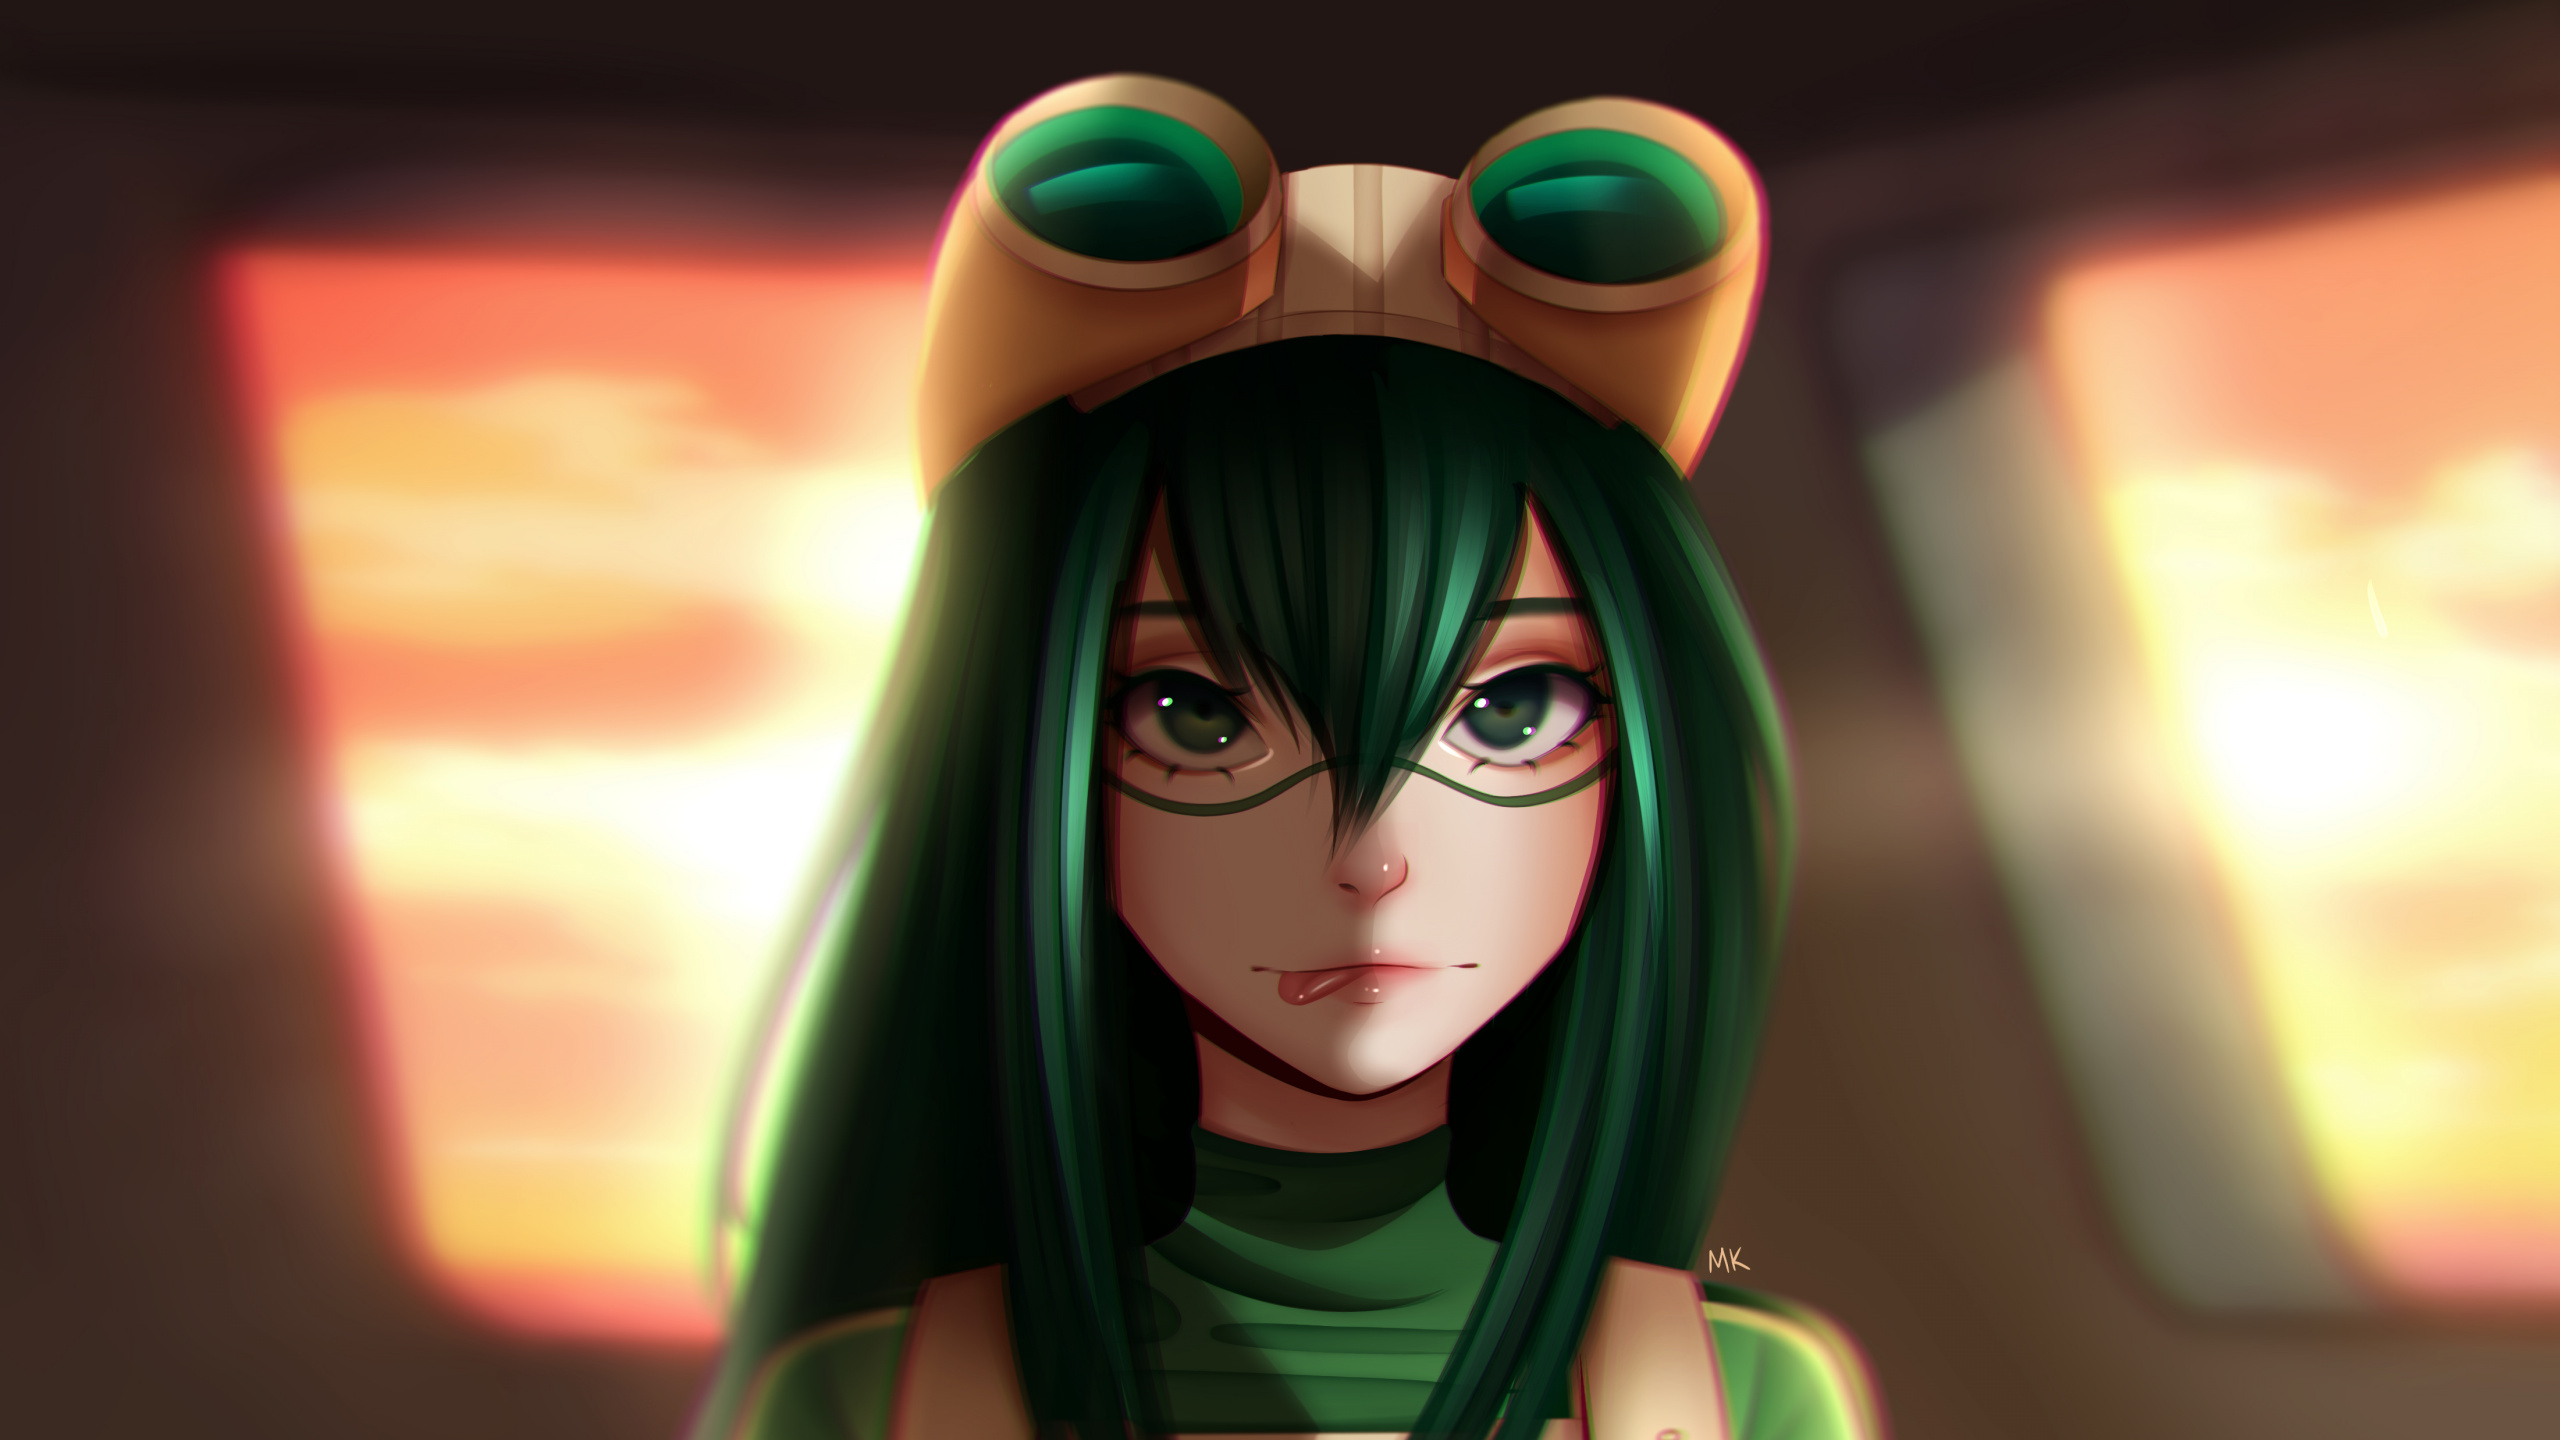 Green Haired Female Anime Character. Wallpaper in 2560x1440 Resolution